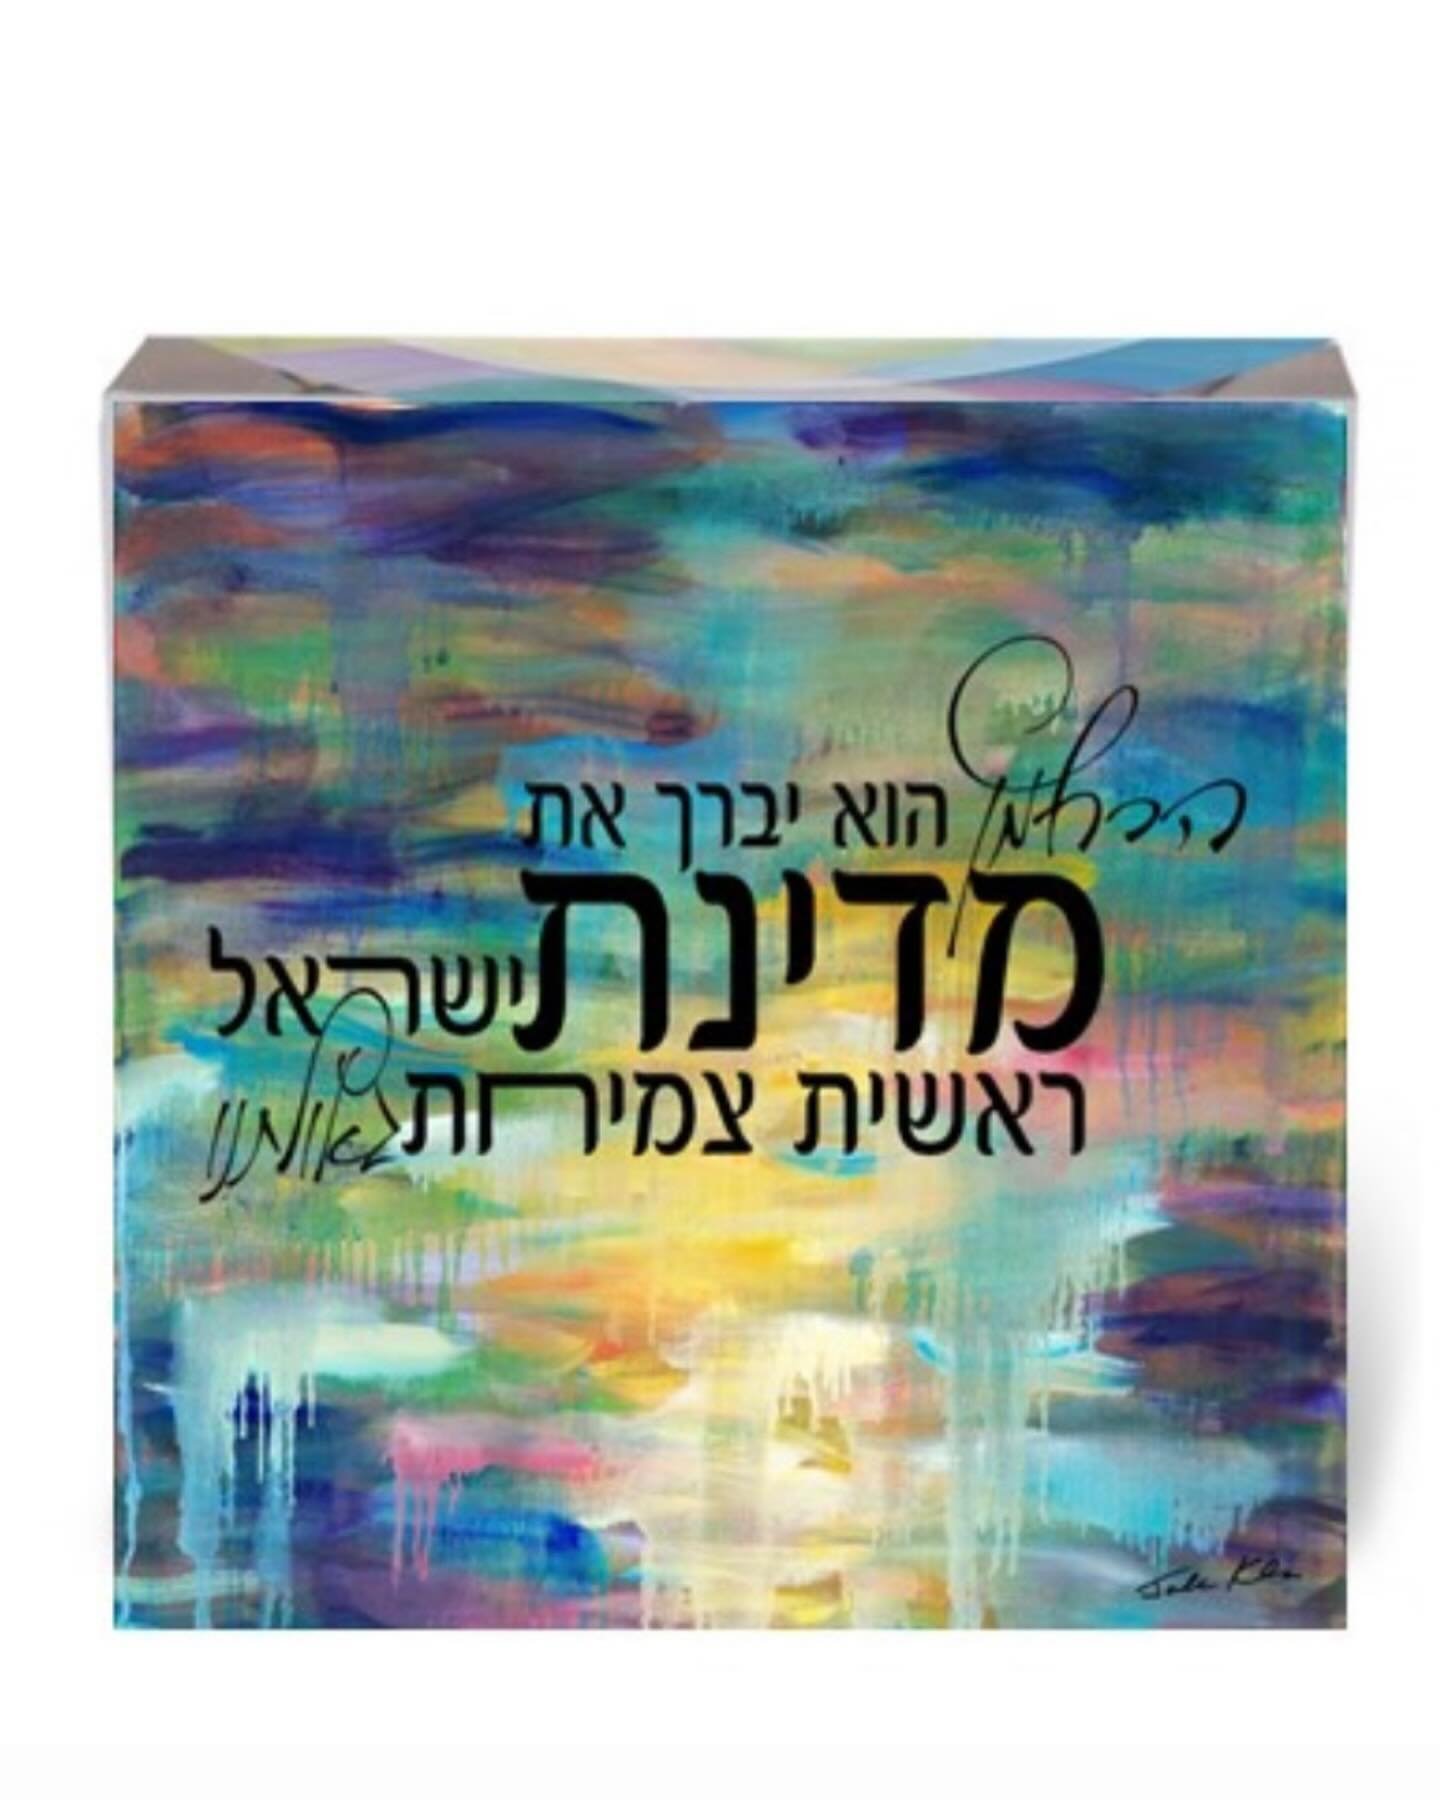 Exclusive to TheDoilyLady. Hand painted Acrylic blocks created by Jordana and imported from Israel. Am Yisrael Chai 🇮🇱 #israel #acrylicblocks #lucite #lucitejudaica #acrylicjudaica #judaica #modernjudaica #jewishhome #candlelighting #shabbos #frida